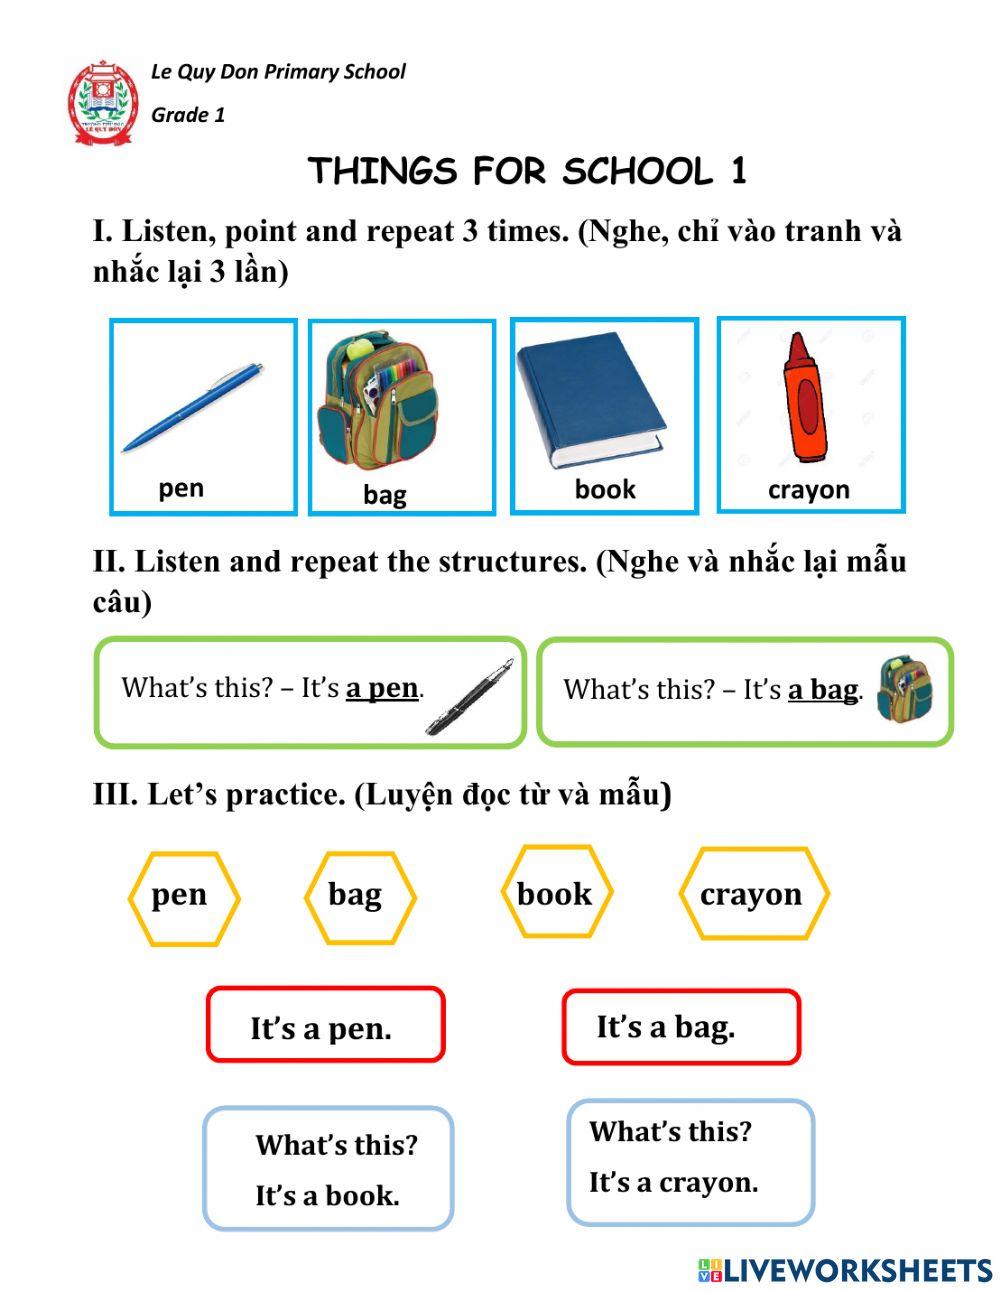 Things for school 1